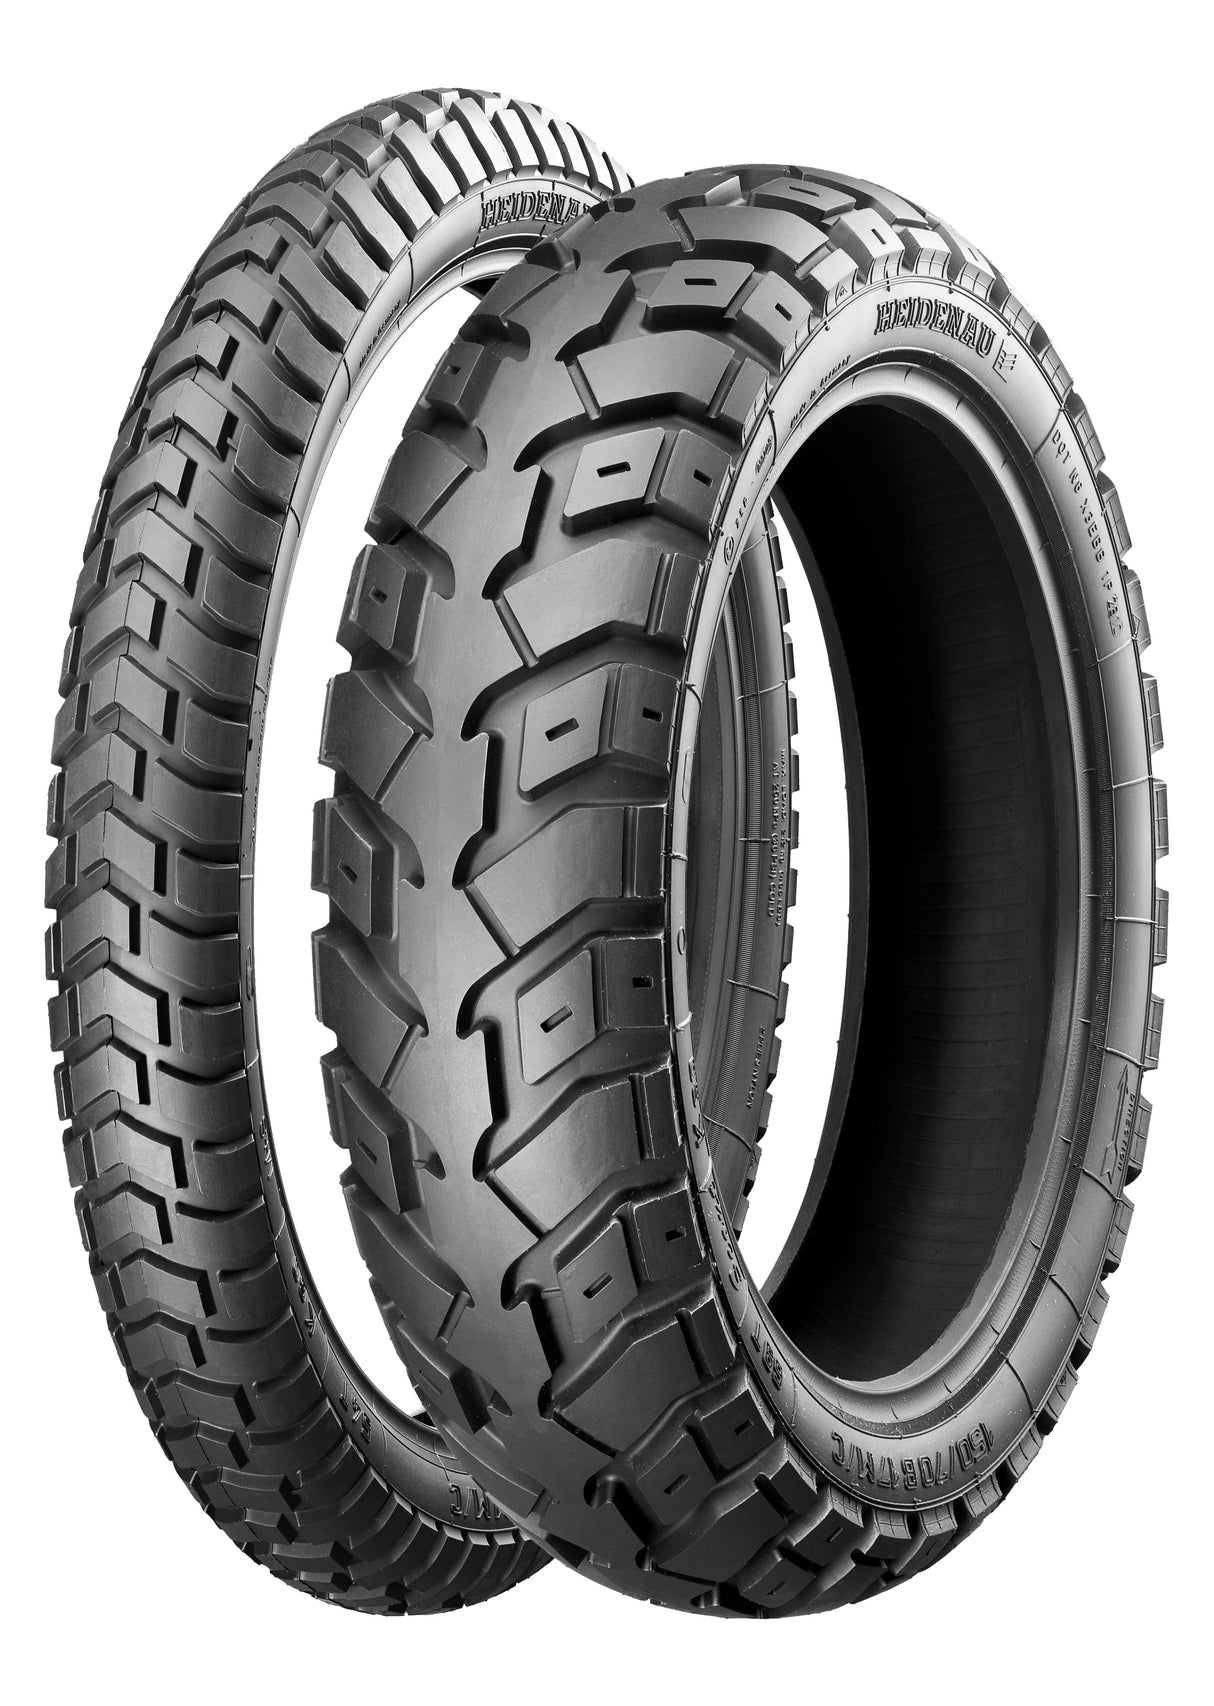 Heidenau K60 Scout 120/70 B 19 M/C 60T M+S TL Dual Sport Off Road Front Tyre